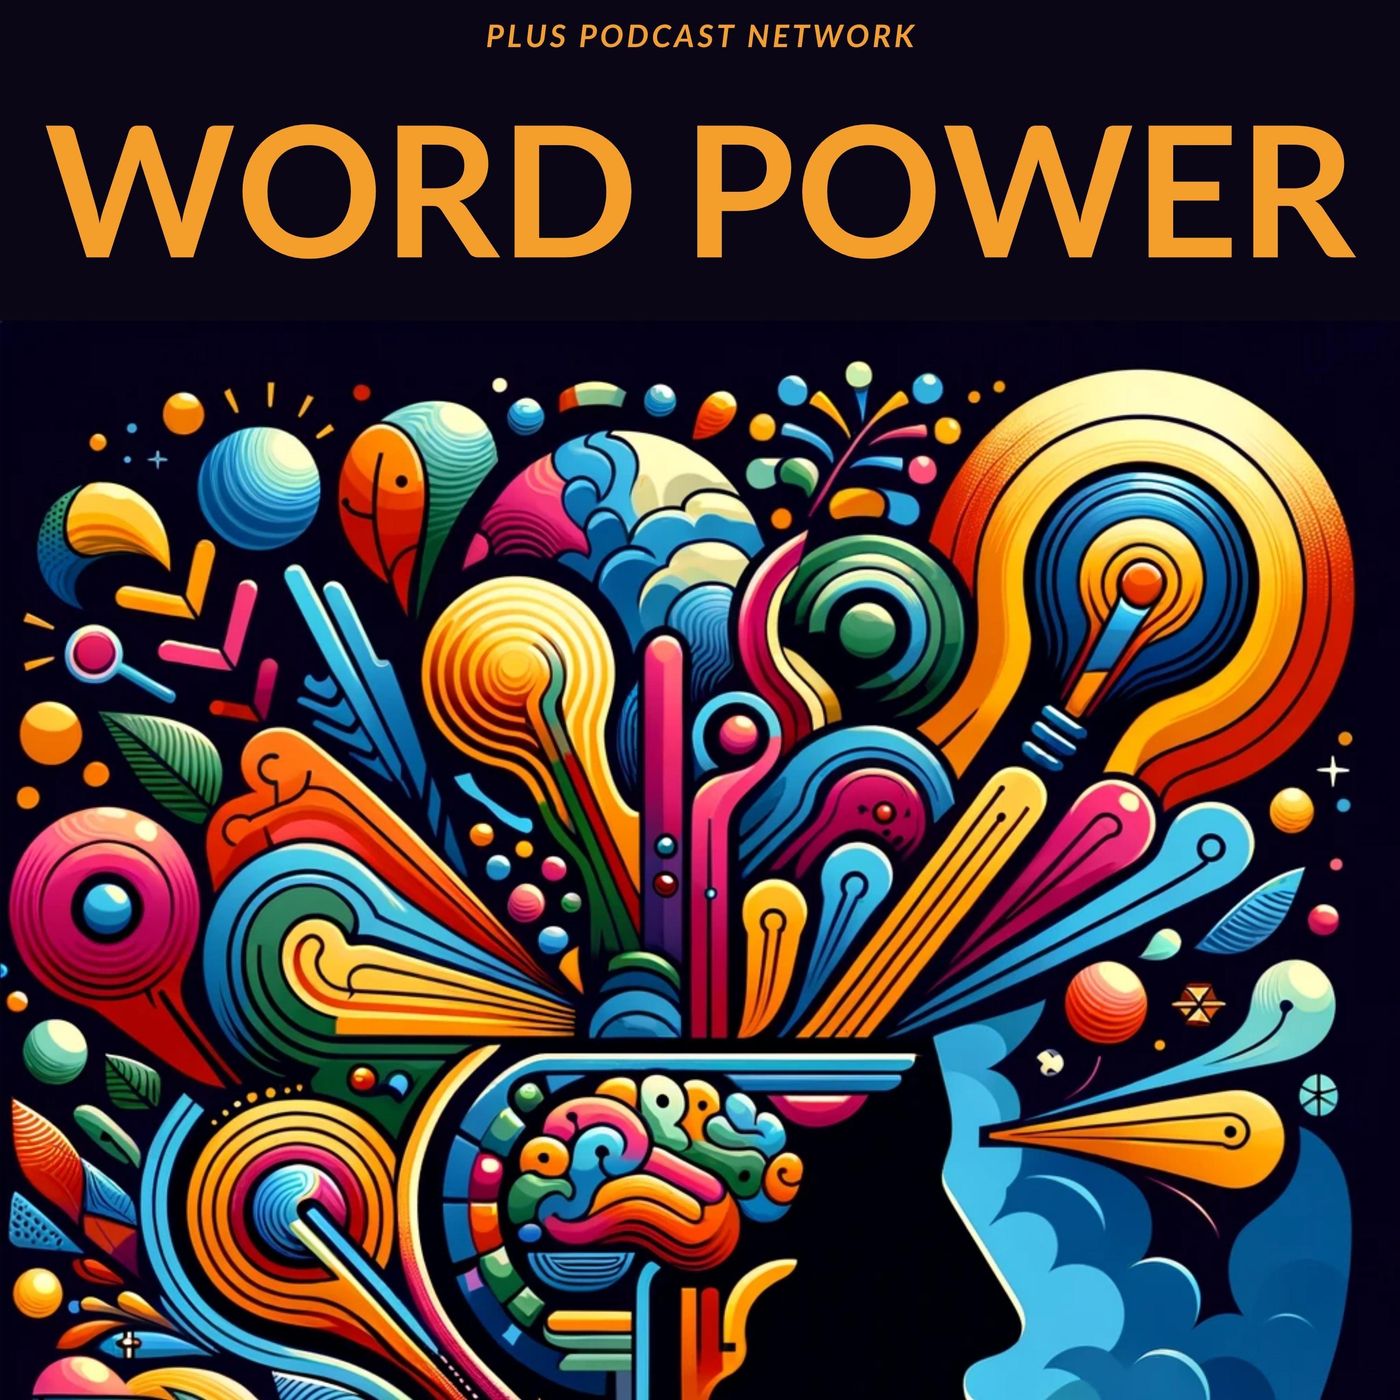 Word Power | A Picture is Worth a Thousand Words